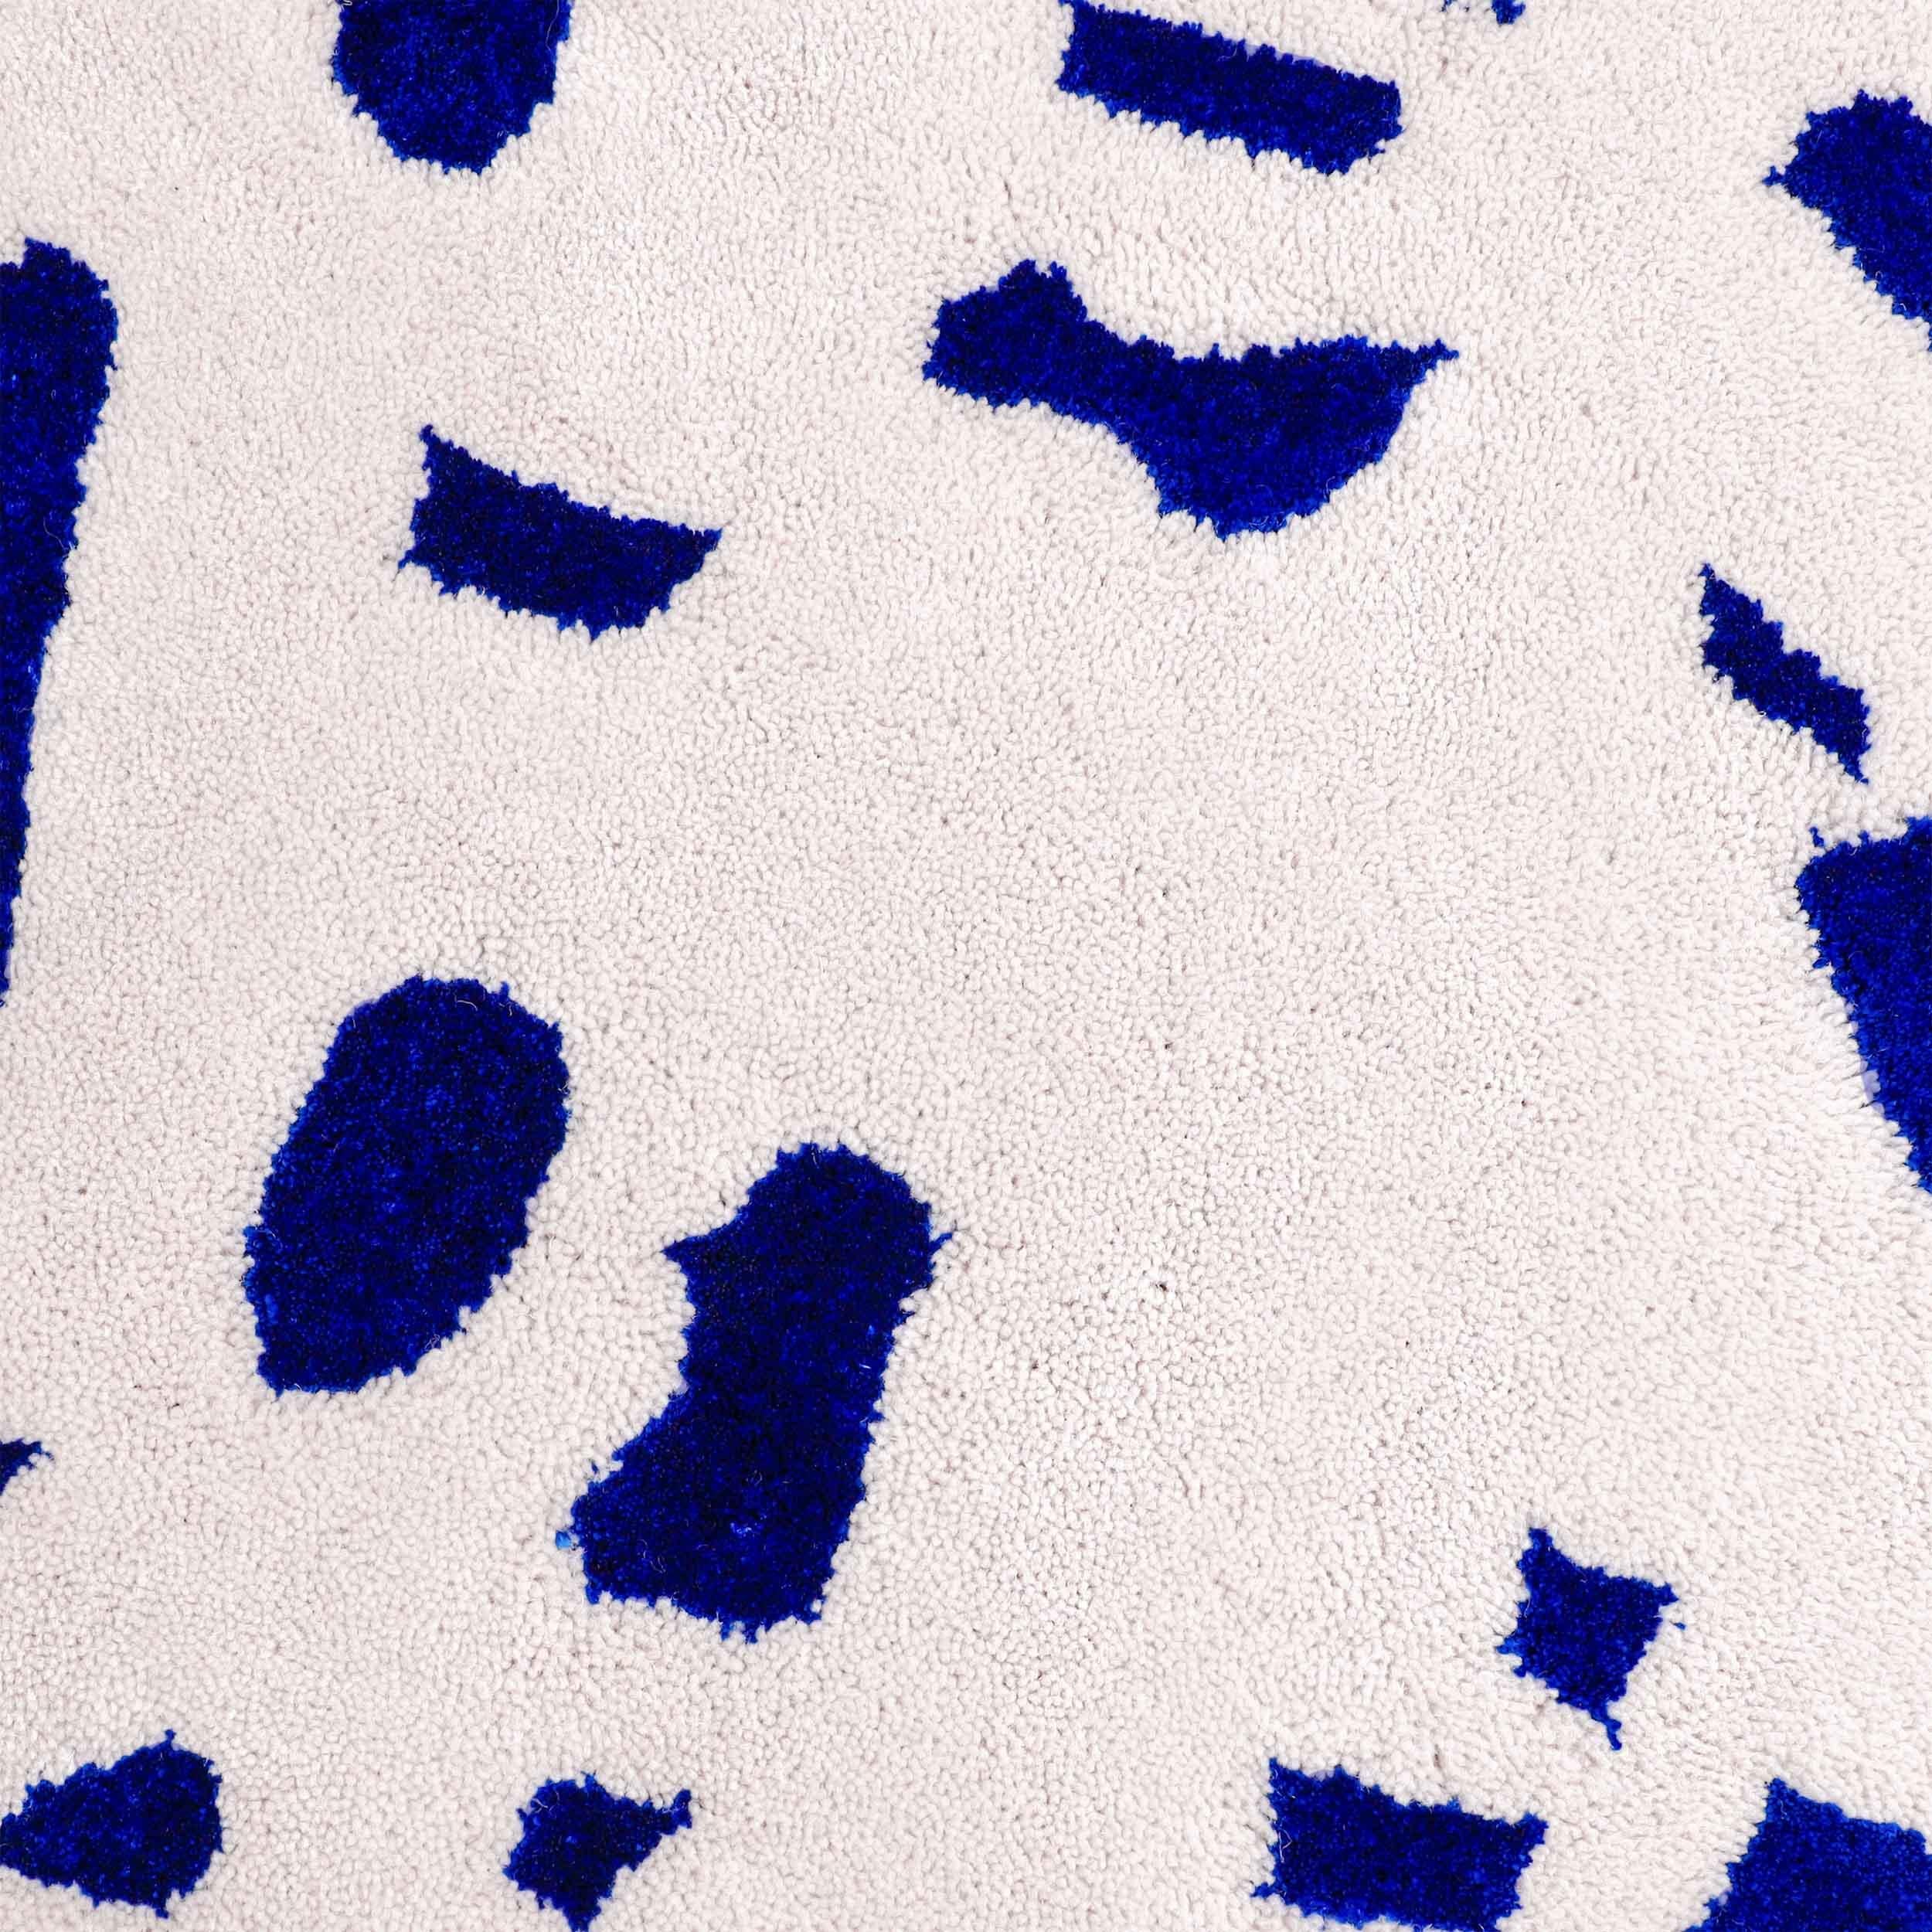 Speckled squiggle features a durable wool surface with a pattern of shiny blue viscose speckles.

Size: 4.5 x 6.5 ft 
Material: Wool + Viscose
Color: Off-White/light gray + Electric Blue*
Made in Sweden

*Colors may vary due to lighting and